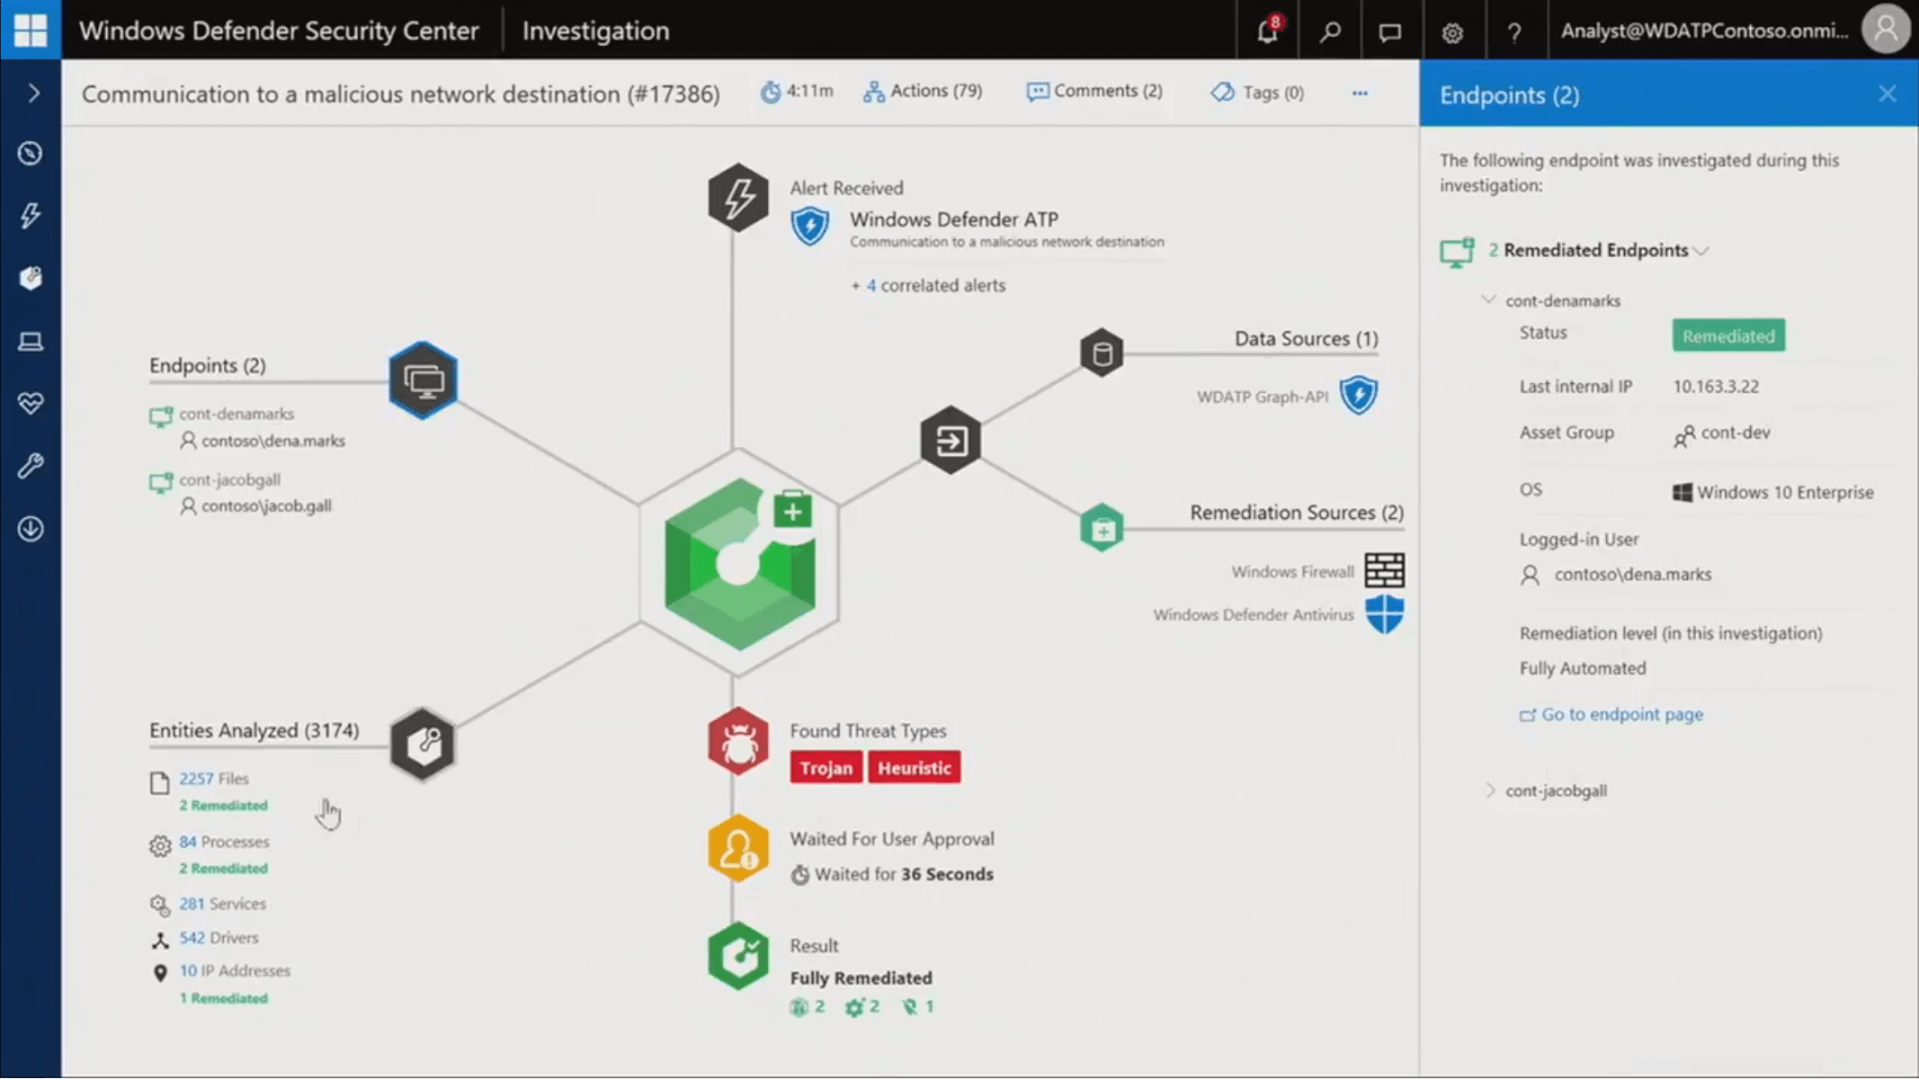 Texte de remplacement généré par une machine : Windows Defender Security Center Investigation Communication to a malicious network destination (#17386) G 4:11m Actions (79) Alert Received 4 Comments (2) 4 O Tags (O) Data Sources (I) WOATP Graph.AP1 ? Analyst@WDATPContoso.onmi.„ Endpoints (2) The following endpoint was investigated during this investigation: 2 Remediated Endpoints Endpoints (2) COnt-denamarks contoso\deoa.marks COntjacobgall A contosovacob.gall Entities Analyzed (3174) 2257 Files Processes 281 Services SQ Drivers 9 10 IP Addresses Windows Defender ATP to a 4 correlated alerts Found Threat Types Trojan Heuristic Waited For User Approval Waited for 36 Seconds Result Fully Remediated cont•denamarks Status Last internal IP Asset Group Logged-in User Remediated 10.163.322 RA cont.dev Windows 10 Enterprise Remediation Sources (2) Windows Firewall Windows Defender Antivirus A contoso\dena.marks Remediation level (in this investigation) Fully Automated Cf Go to endpoint page cont•jacobgall 